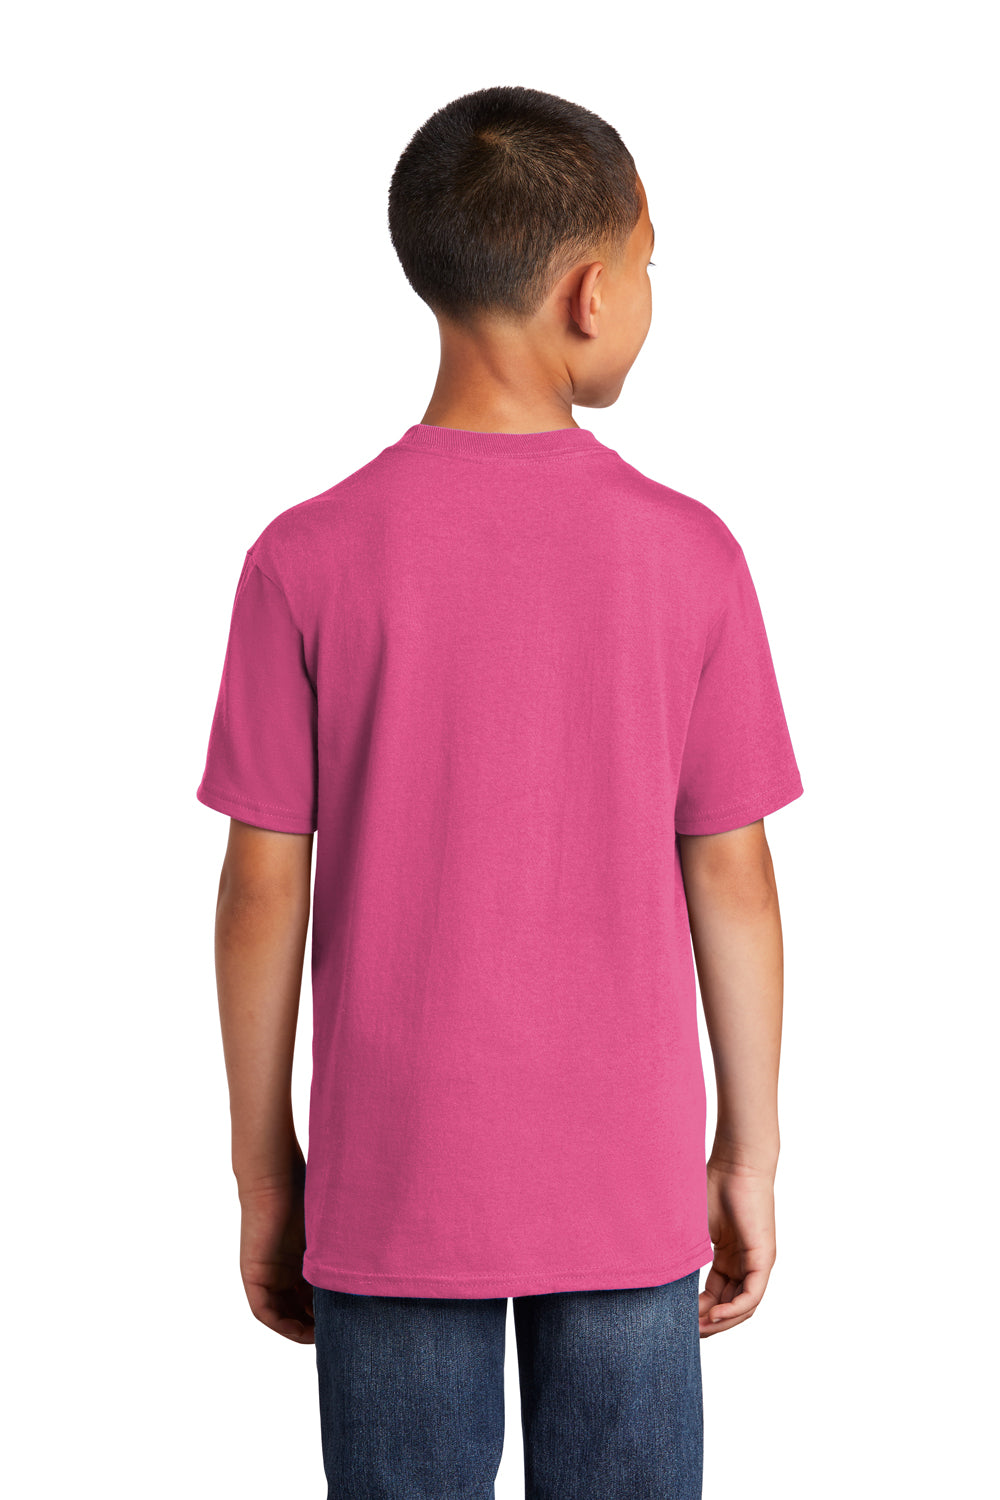 Port & Company PC54Y Youth Core Short Sleeve Crewneck T-Shirt Sangria Pink Back